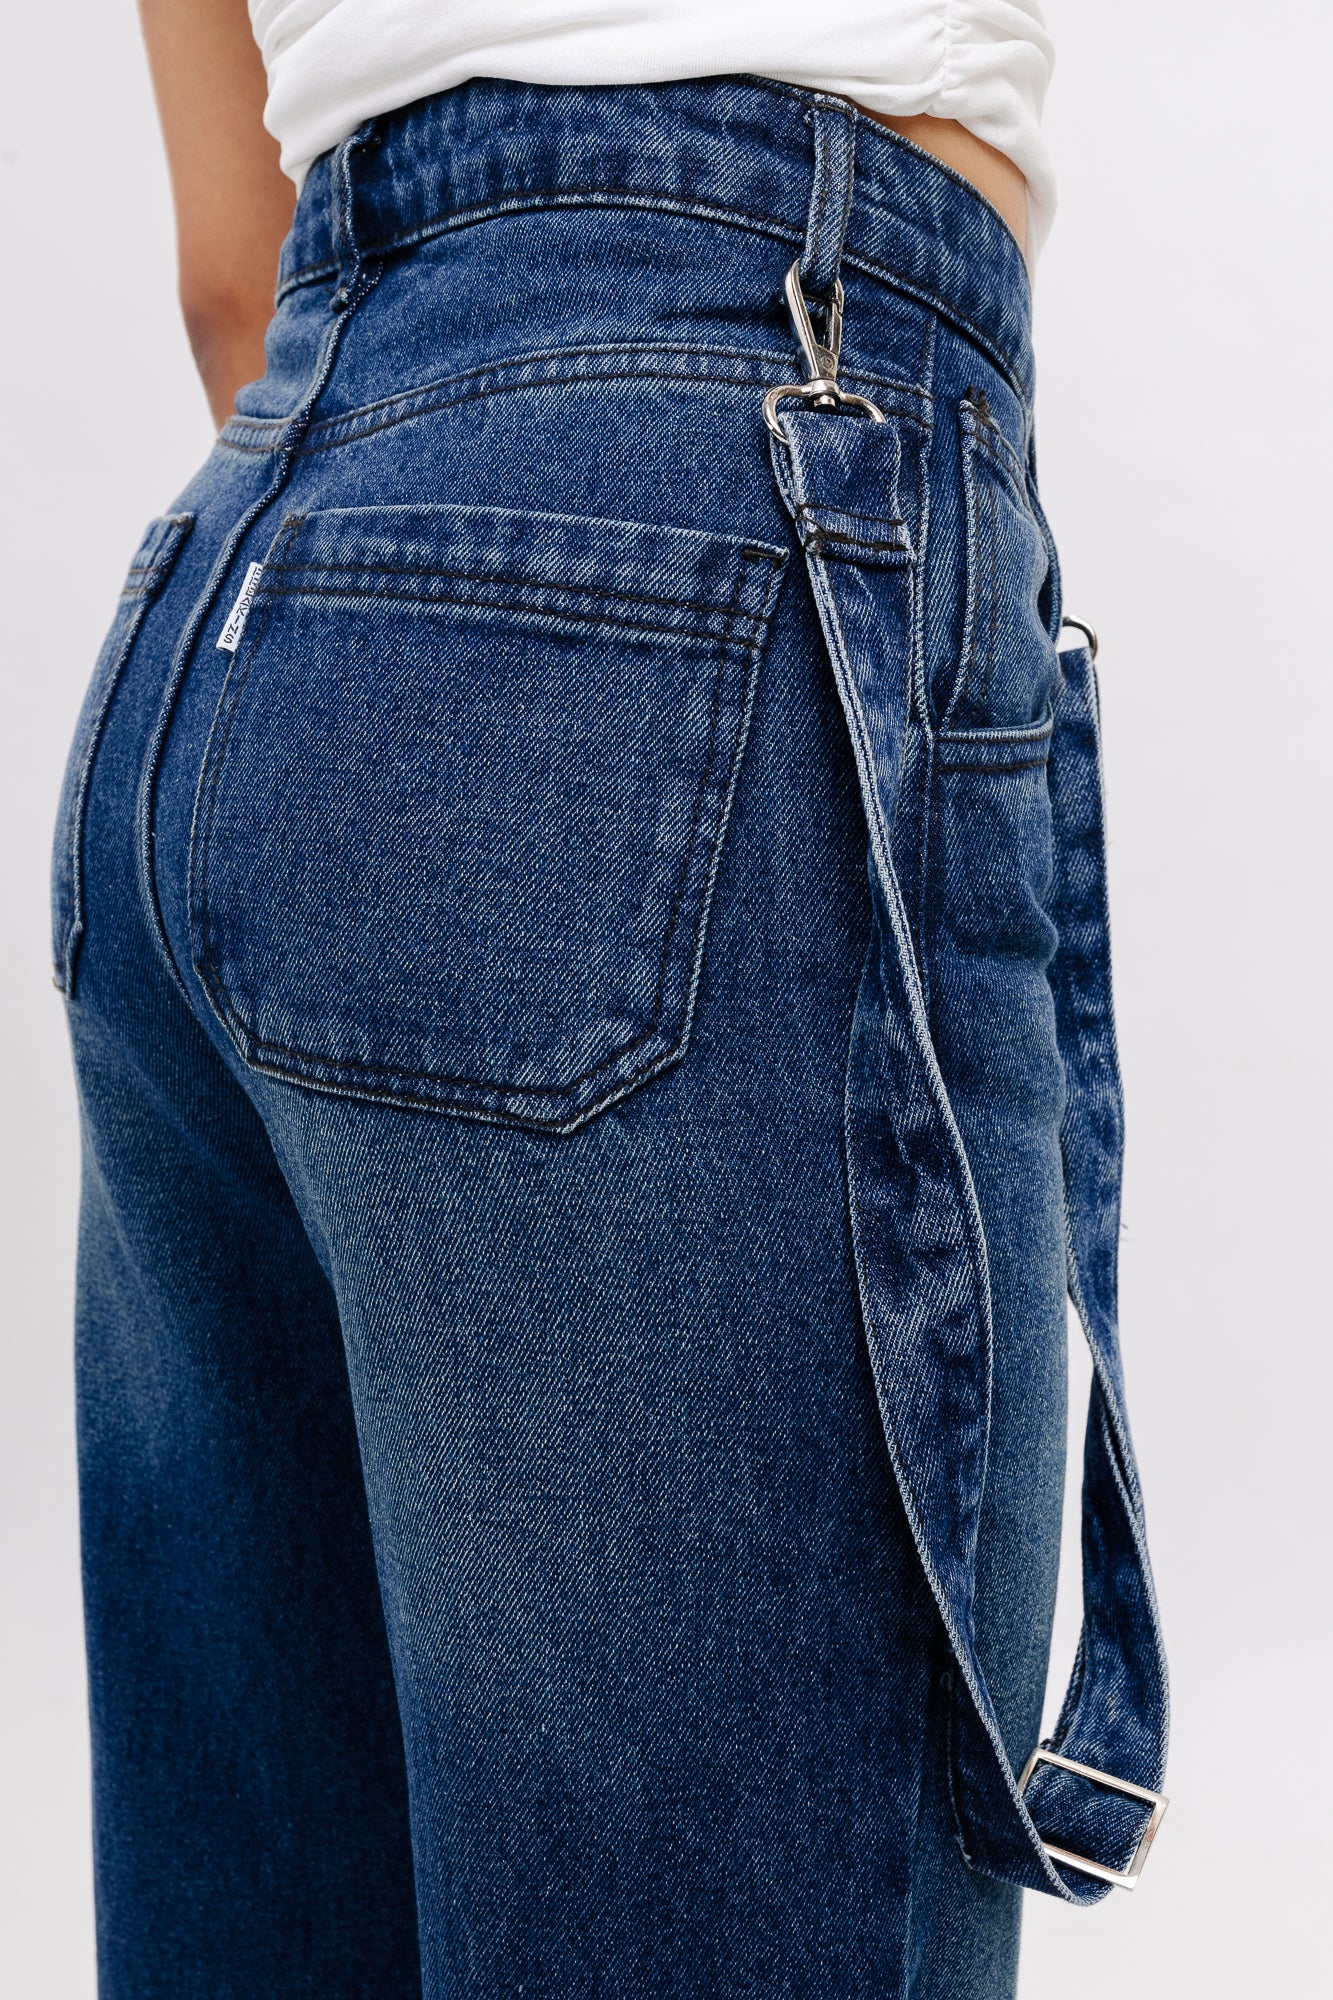 Straight Fit Jeans for Men | Shop Men's Straight Fit Jeans at Best Prices  at Pepe Jeans India!